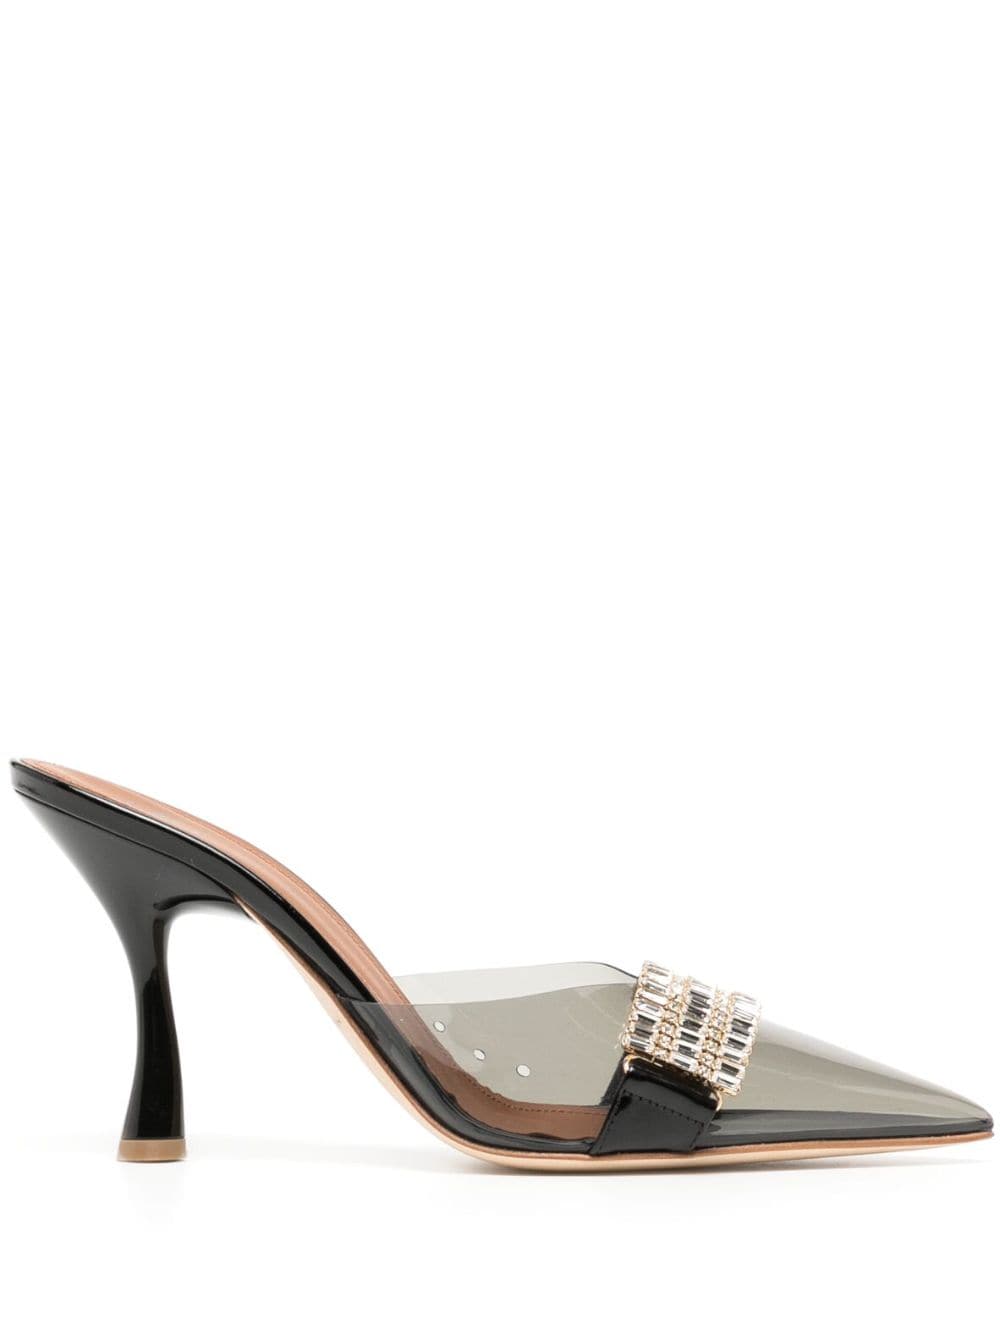 Malone Souliers Joelle 90mm leather mules - Grey von Malone Souliers